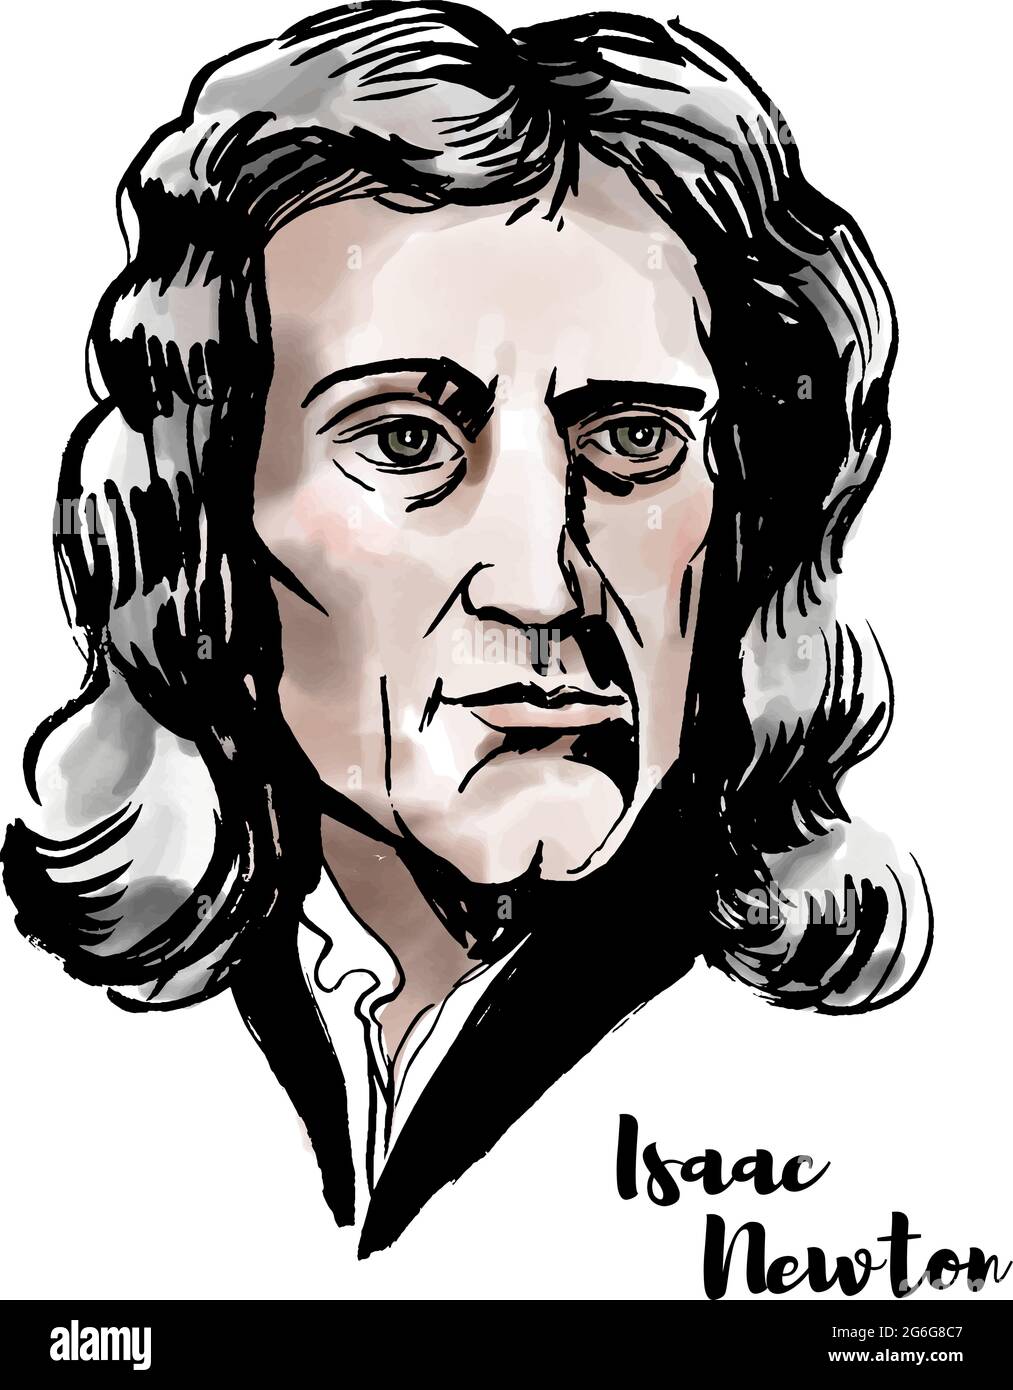 Isaac Newton watercolor vector portrait with ink contours. English mathematician, astronomer, theologian, author and physicist. Stock Vector